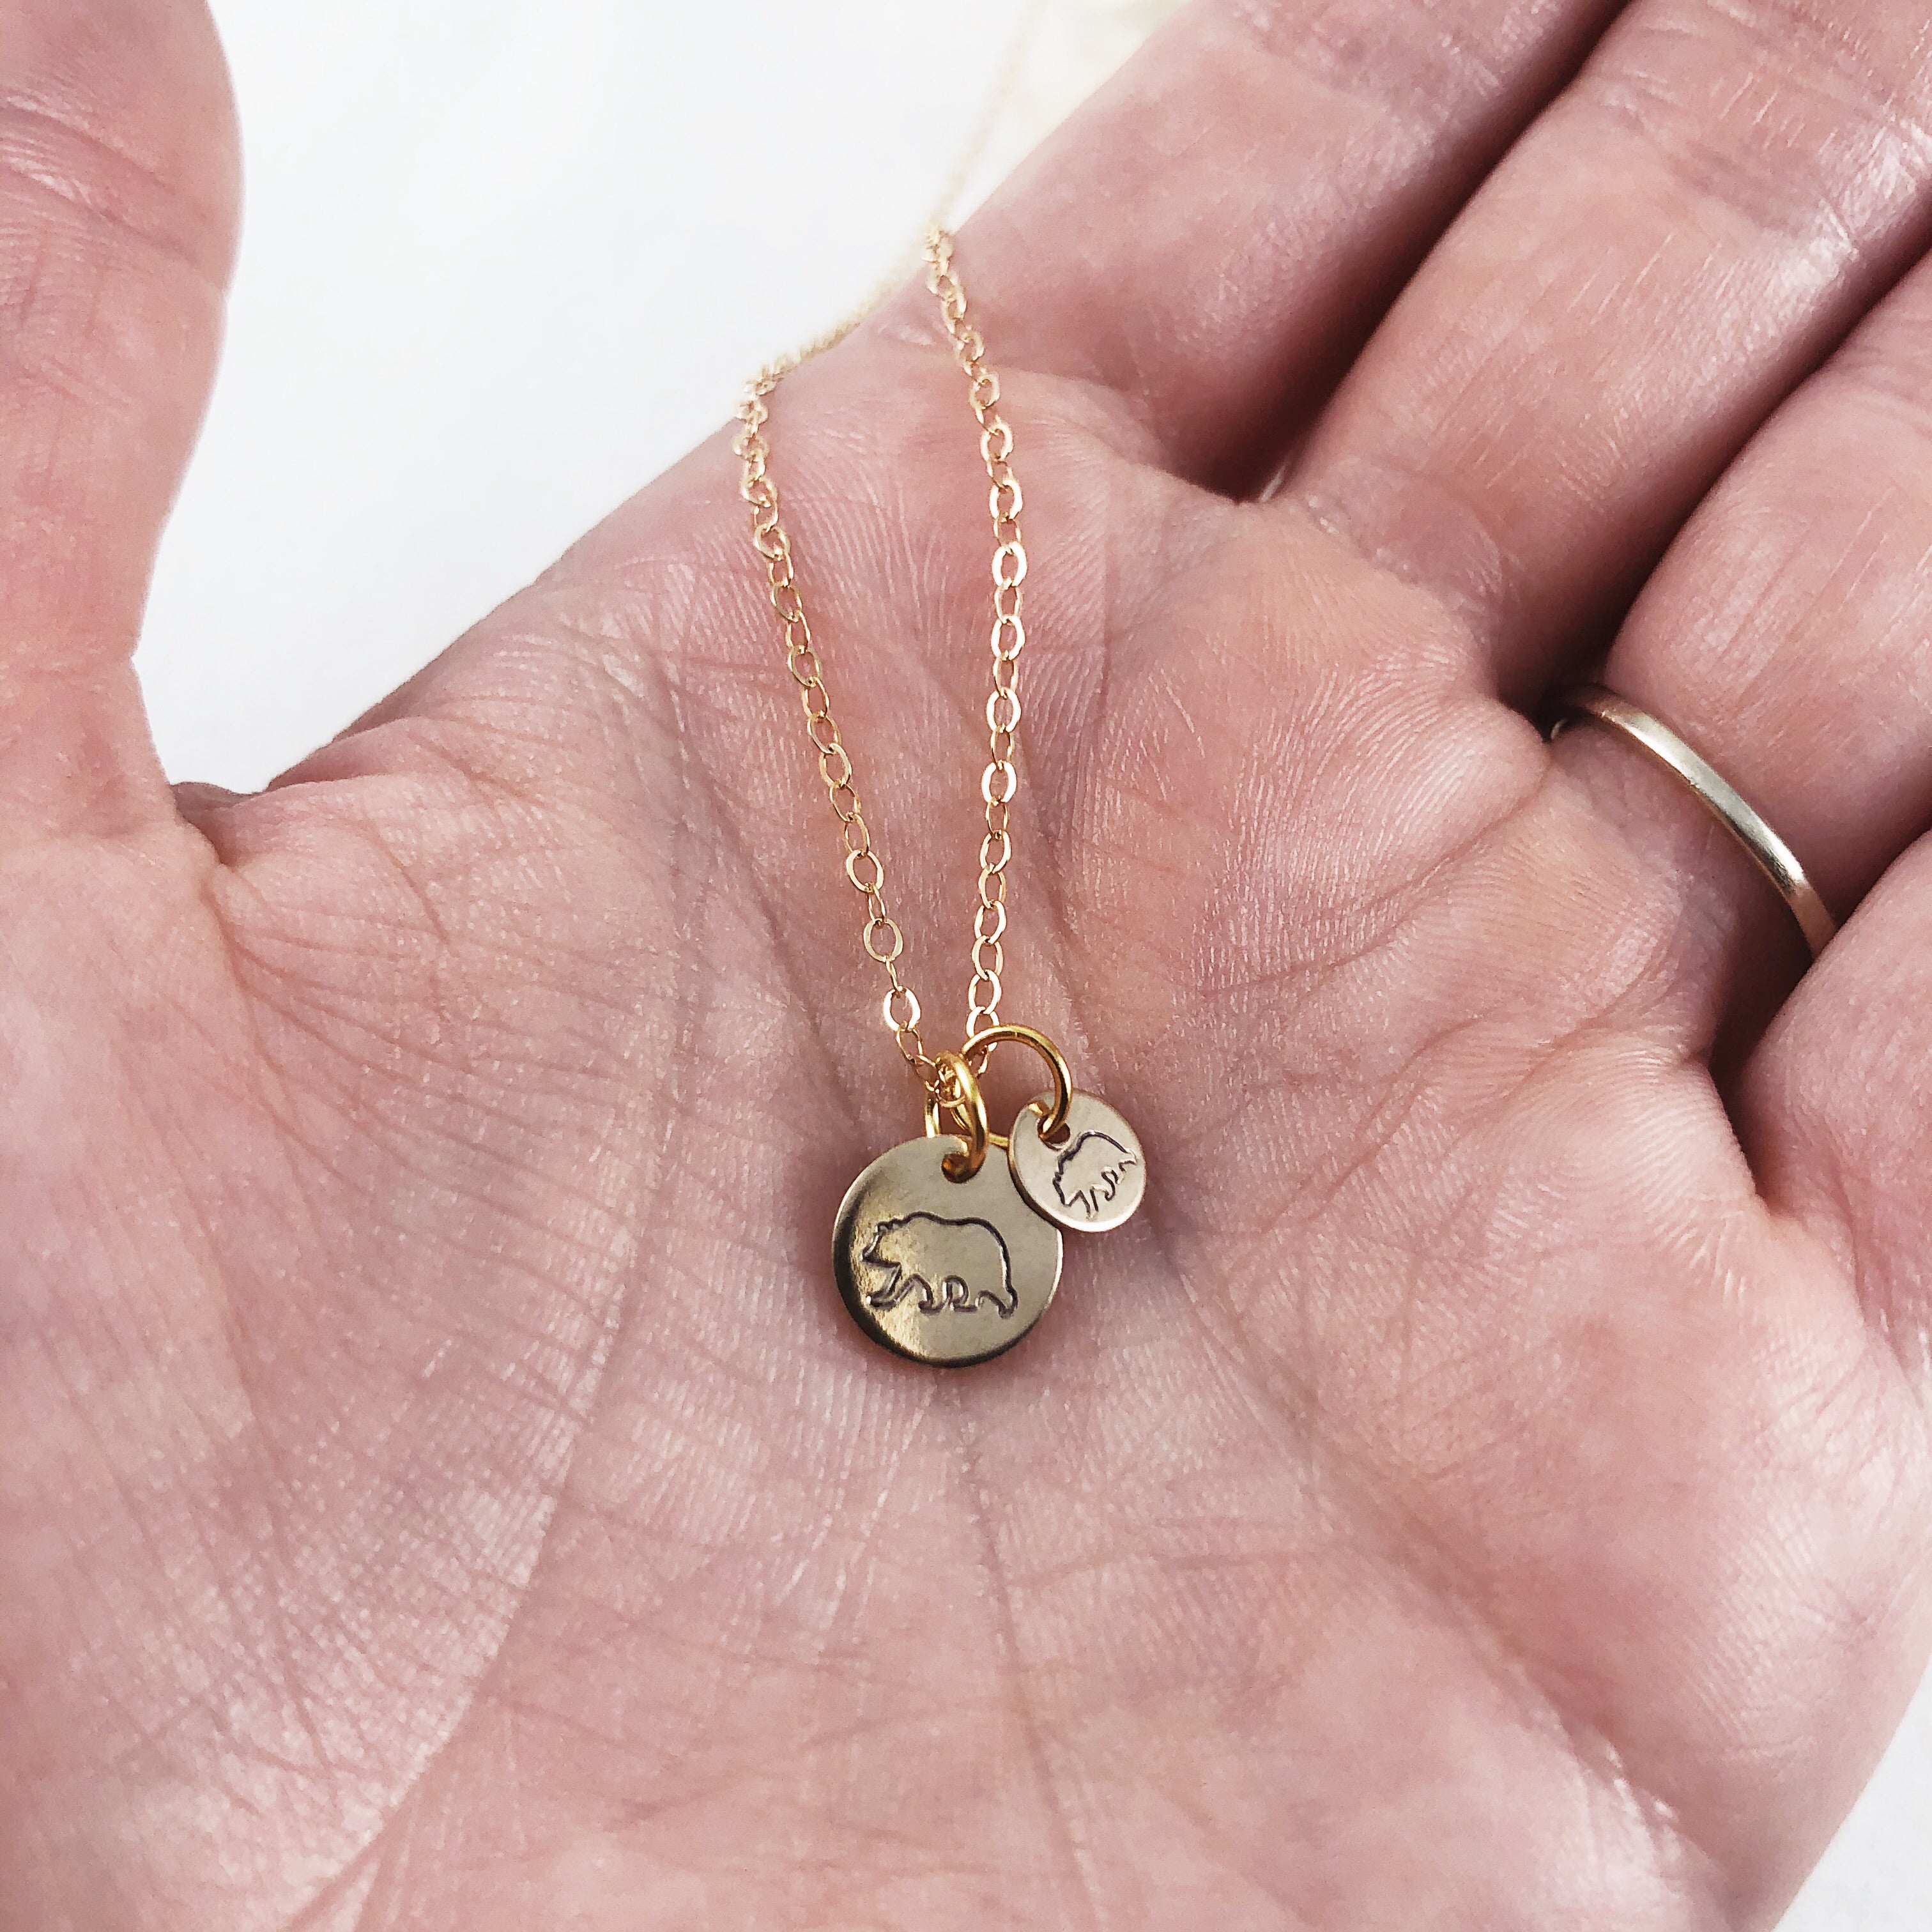 StyledU Mama Bear for Mom, 14K Gold Filled Mama Bear Dainty Disc Necklace, Mama Bear Pendant Necklace for Mothers Day Jewelry Birthday Gift, New Mom